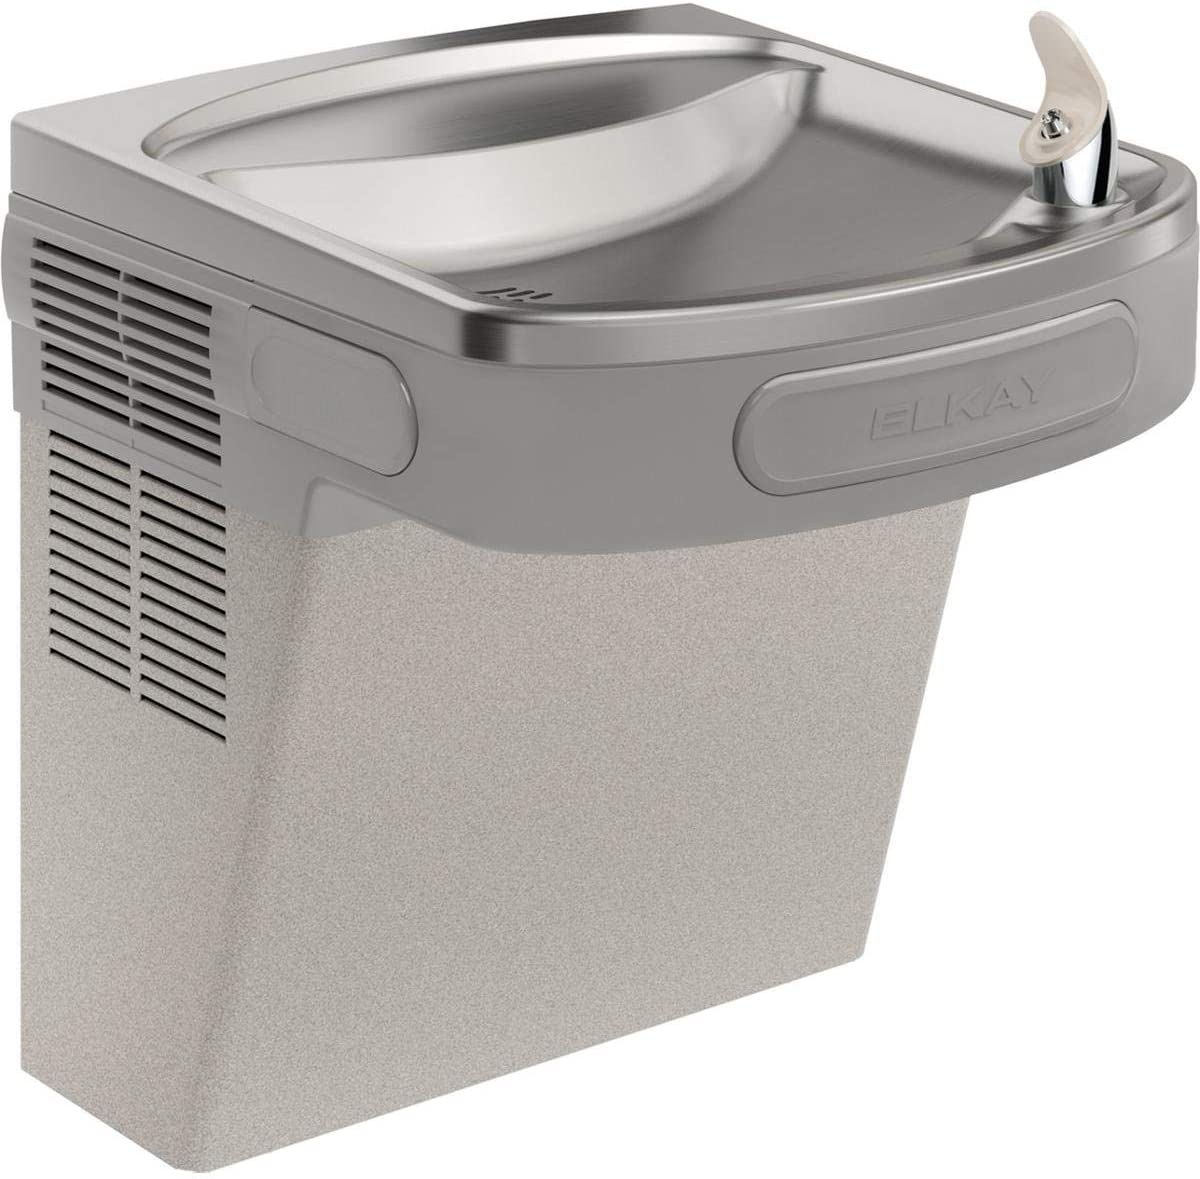 Elkay EZS8L - Wall Mounted Drinking Fountain with Water Cooler